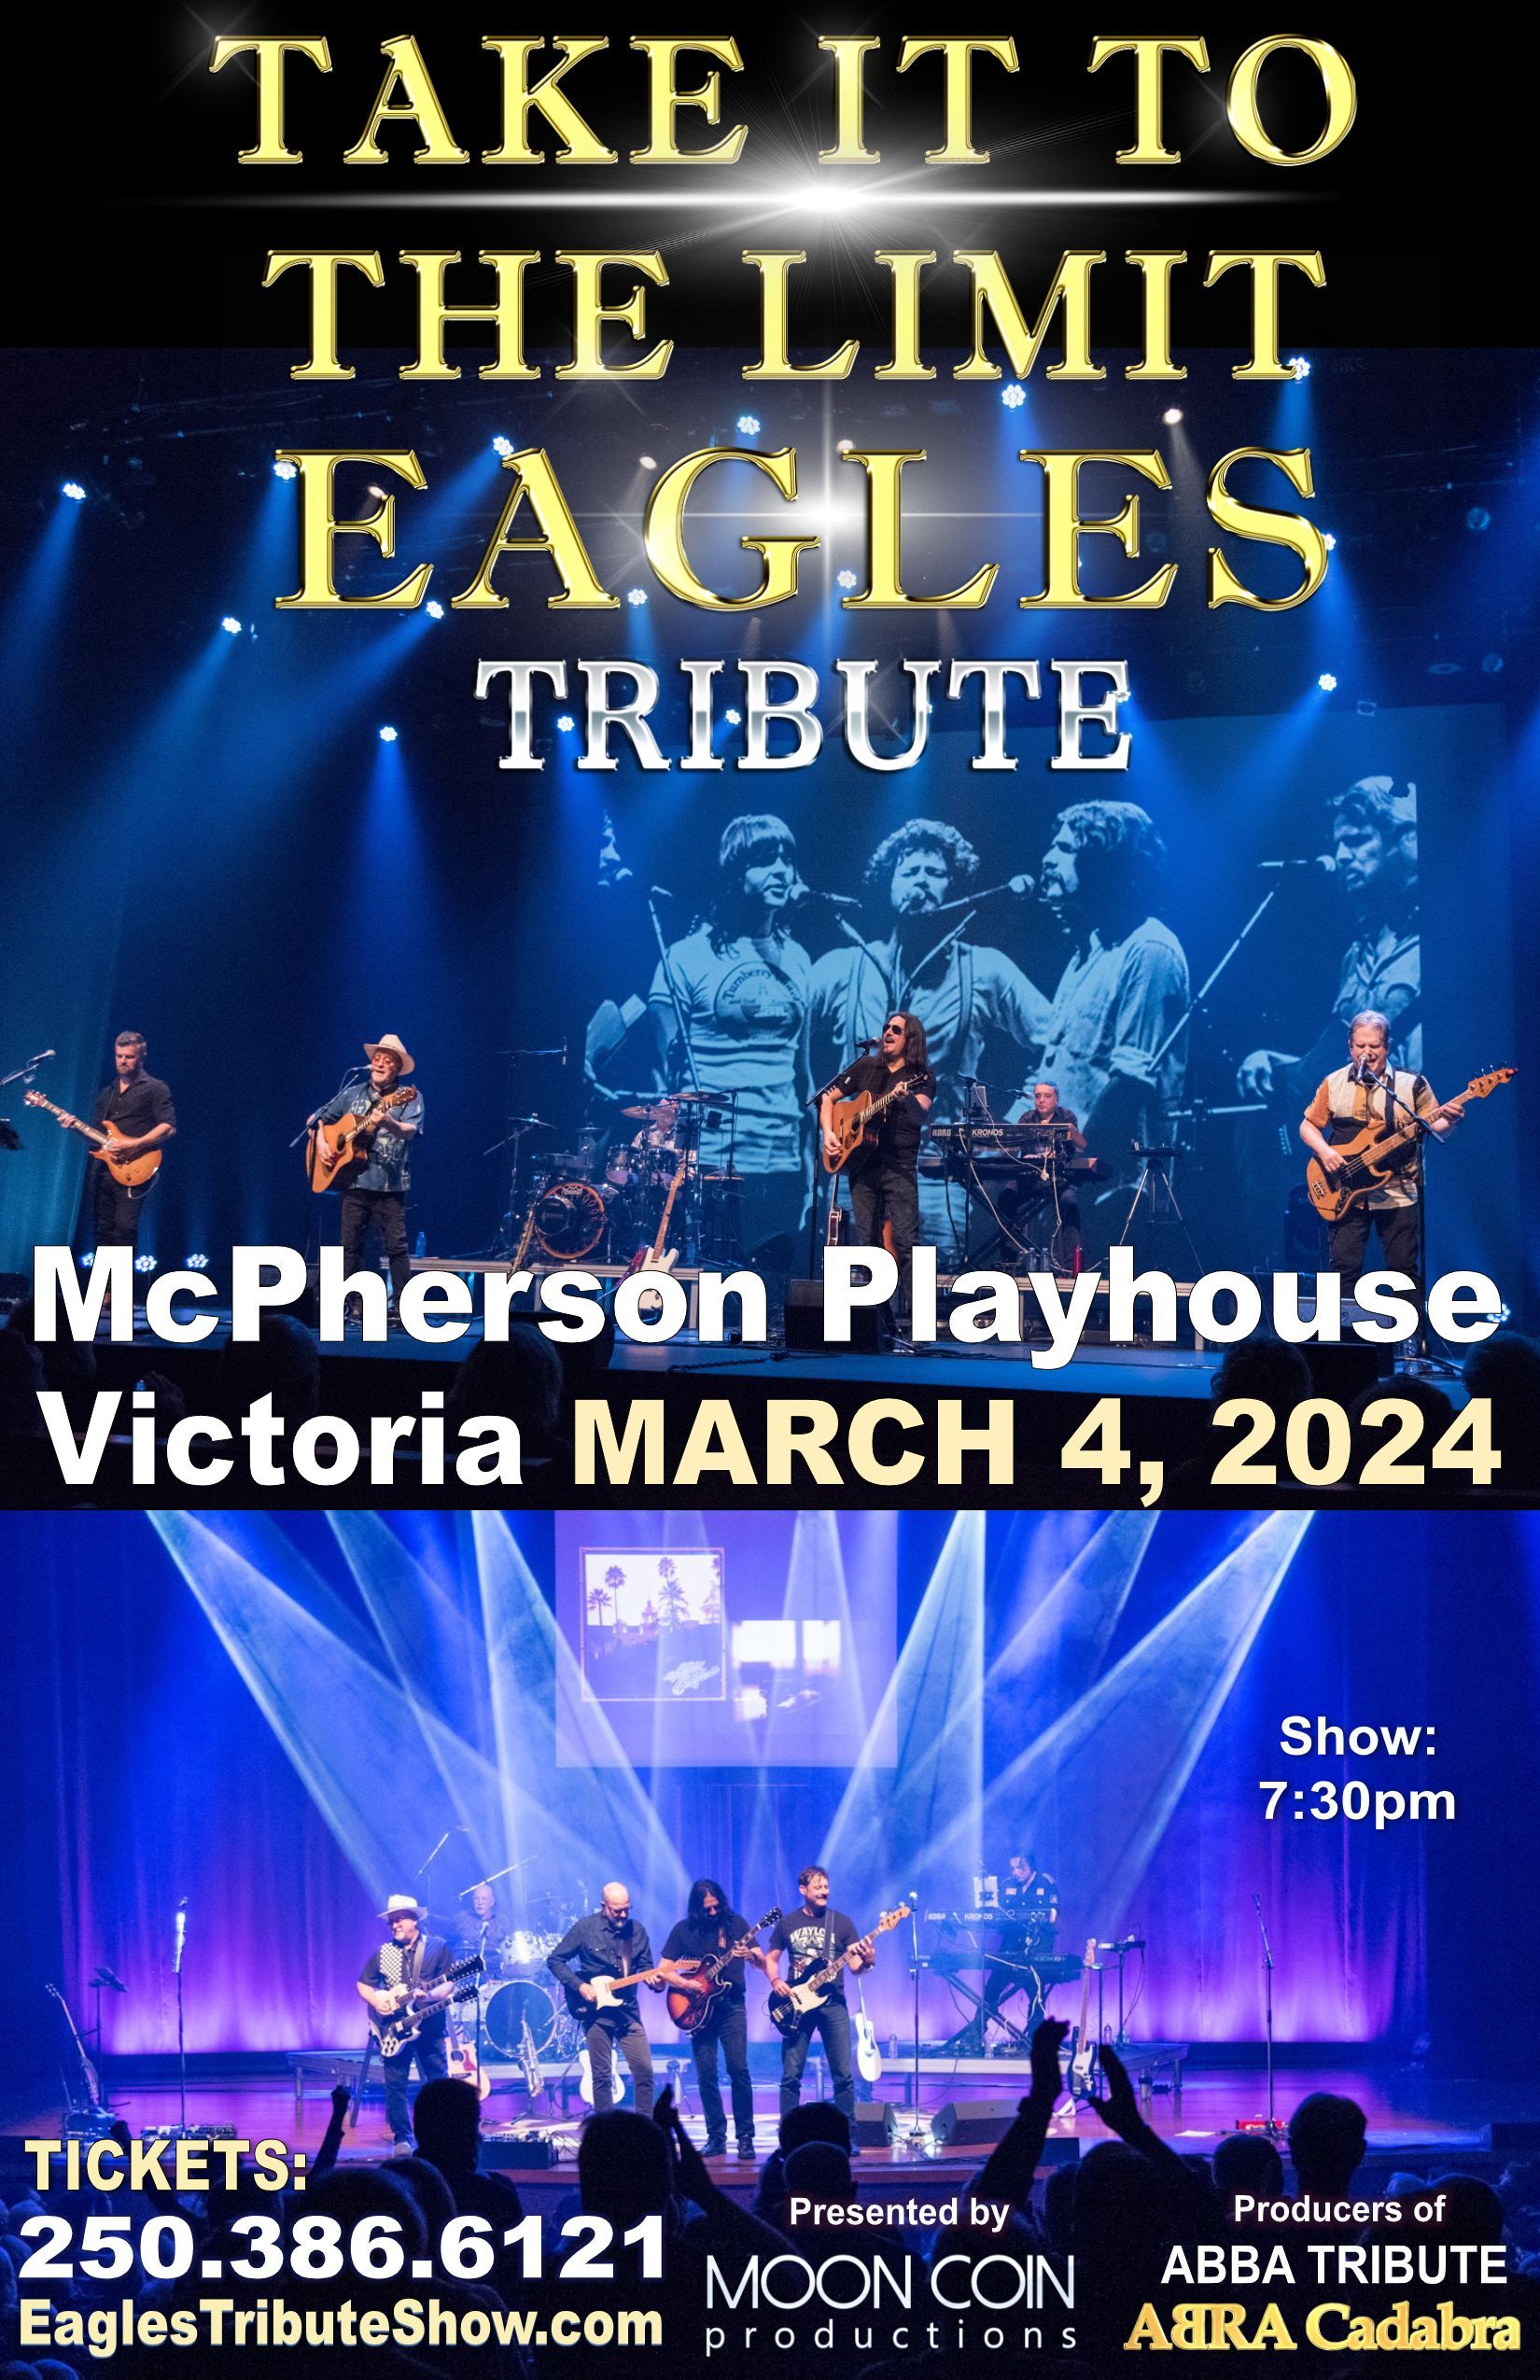 POSTER Take It To the Limit_Eagles Tribute_11 X 17 POSTER_McPherson Playhouse MAR 4 2024